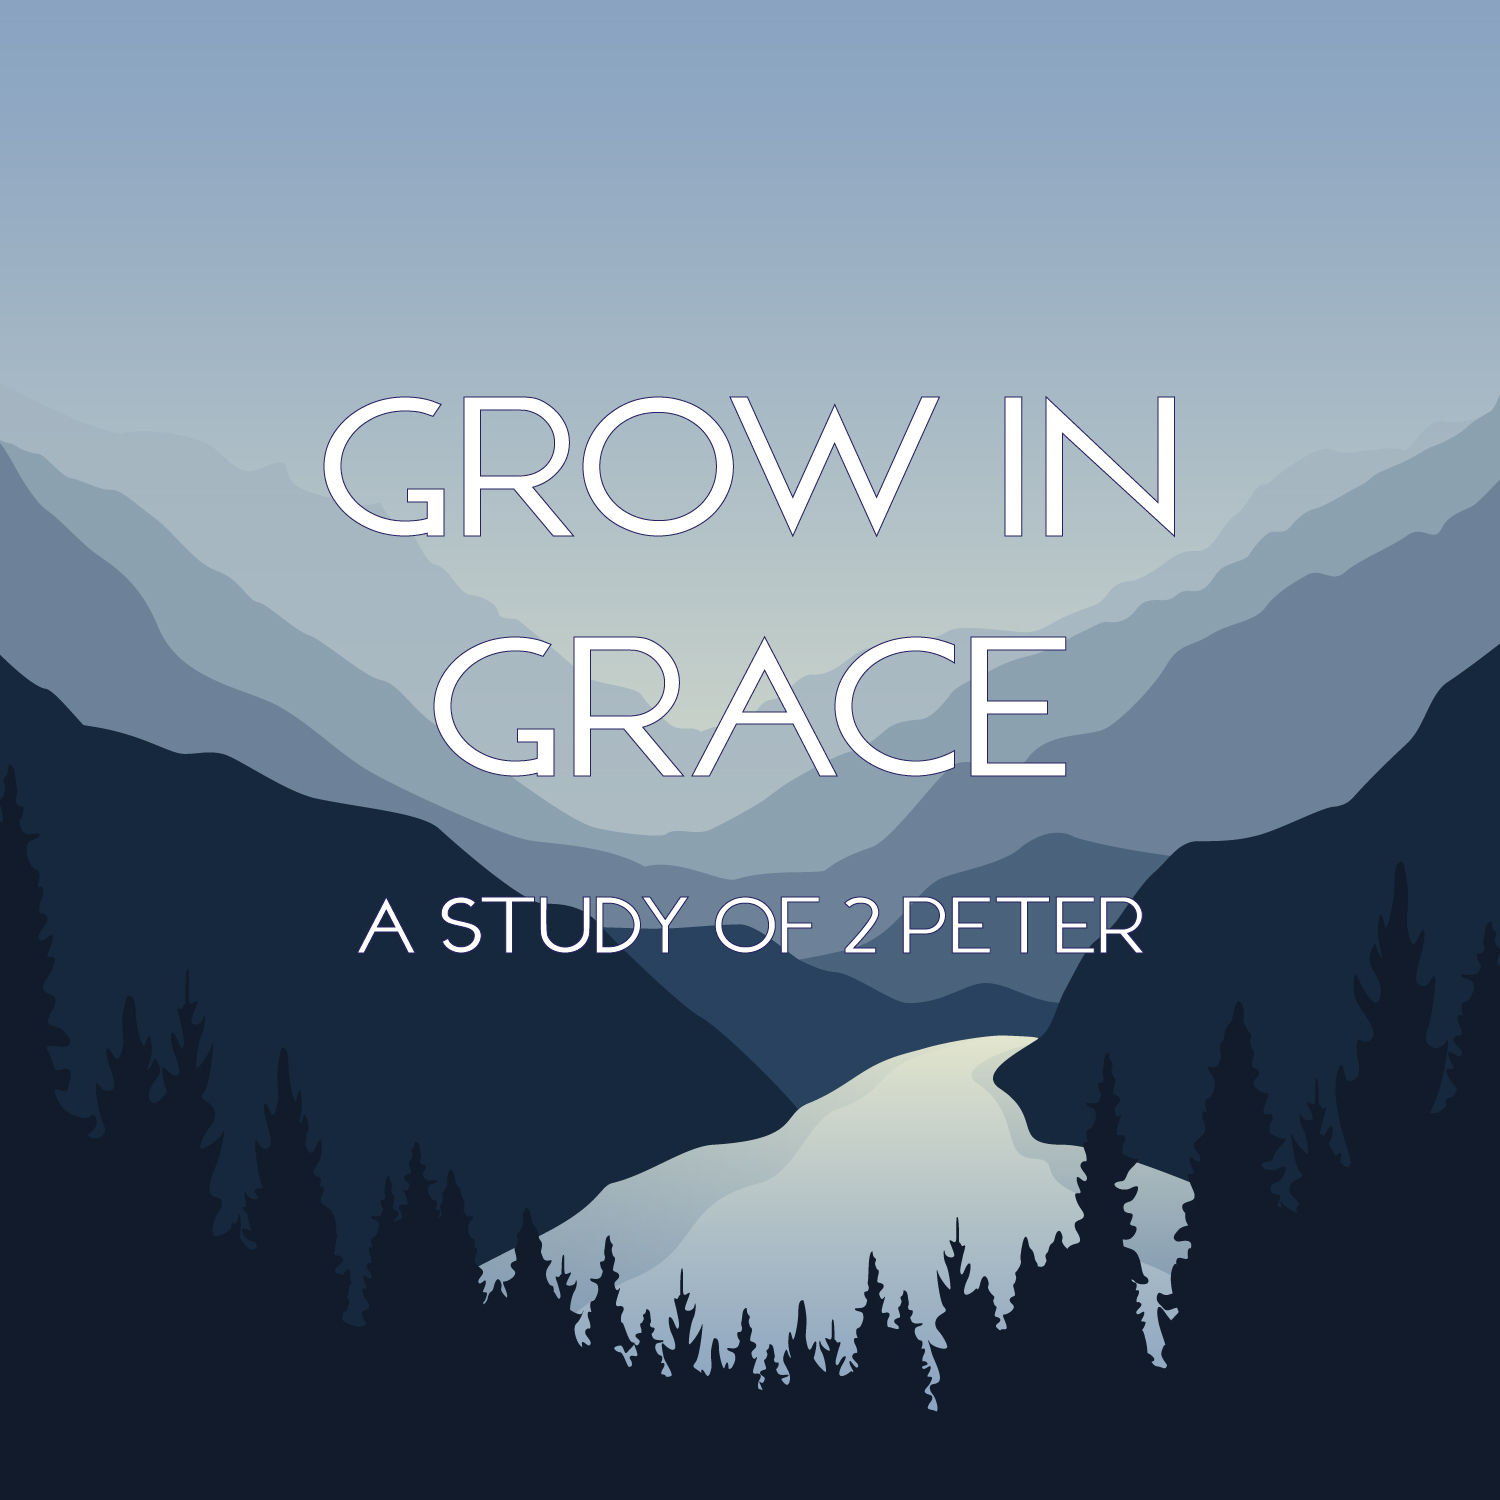 2 Peter 1:1-4: More Grace and Peace (1-2-2022)